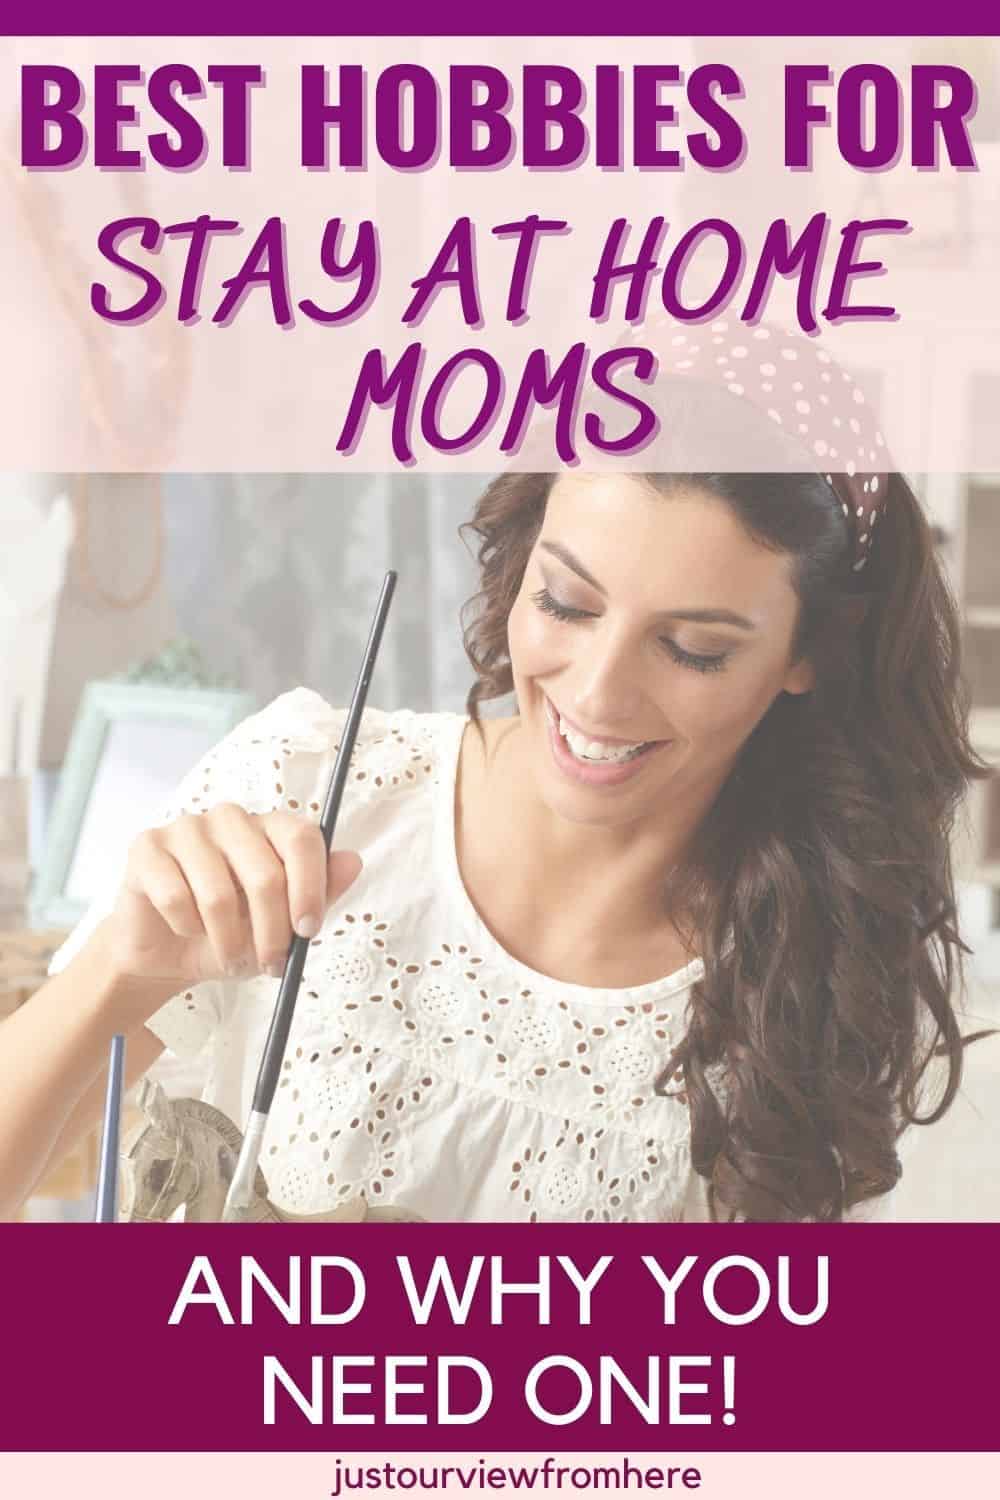 woman painting ceramics, text overlay best hobbies for stay at home moms and why you need one